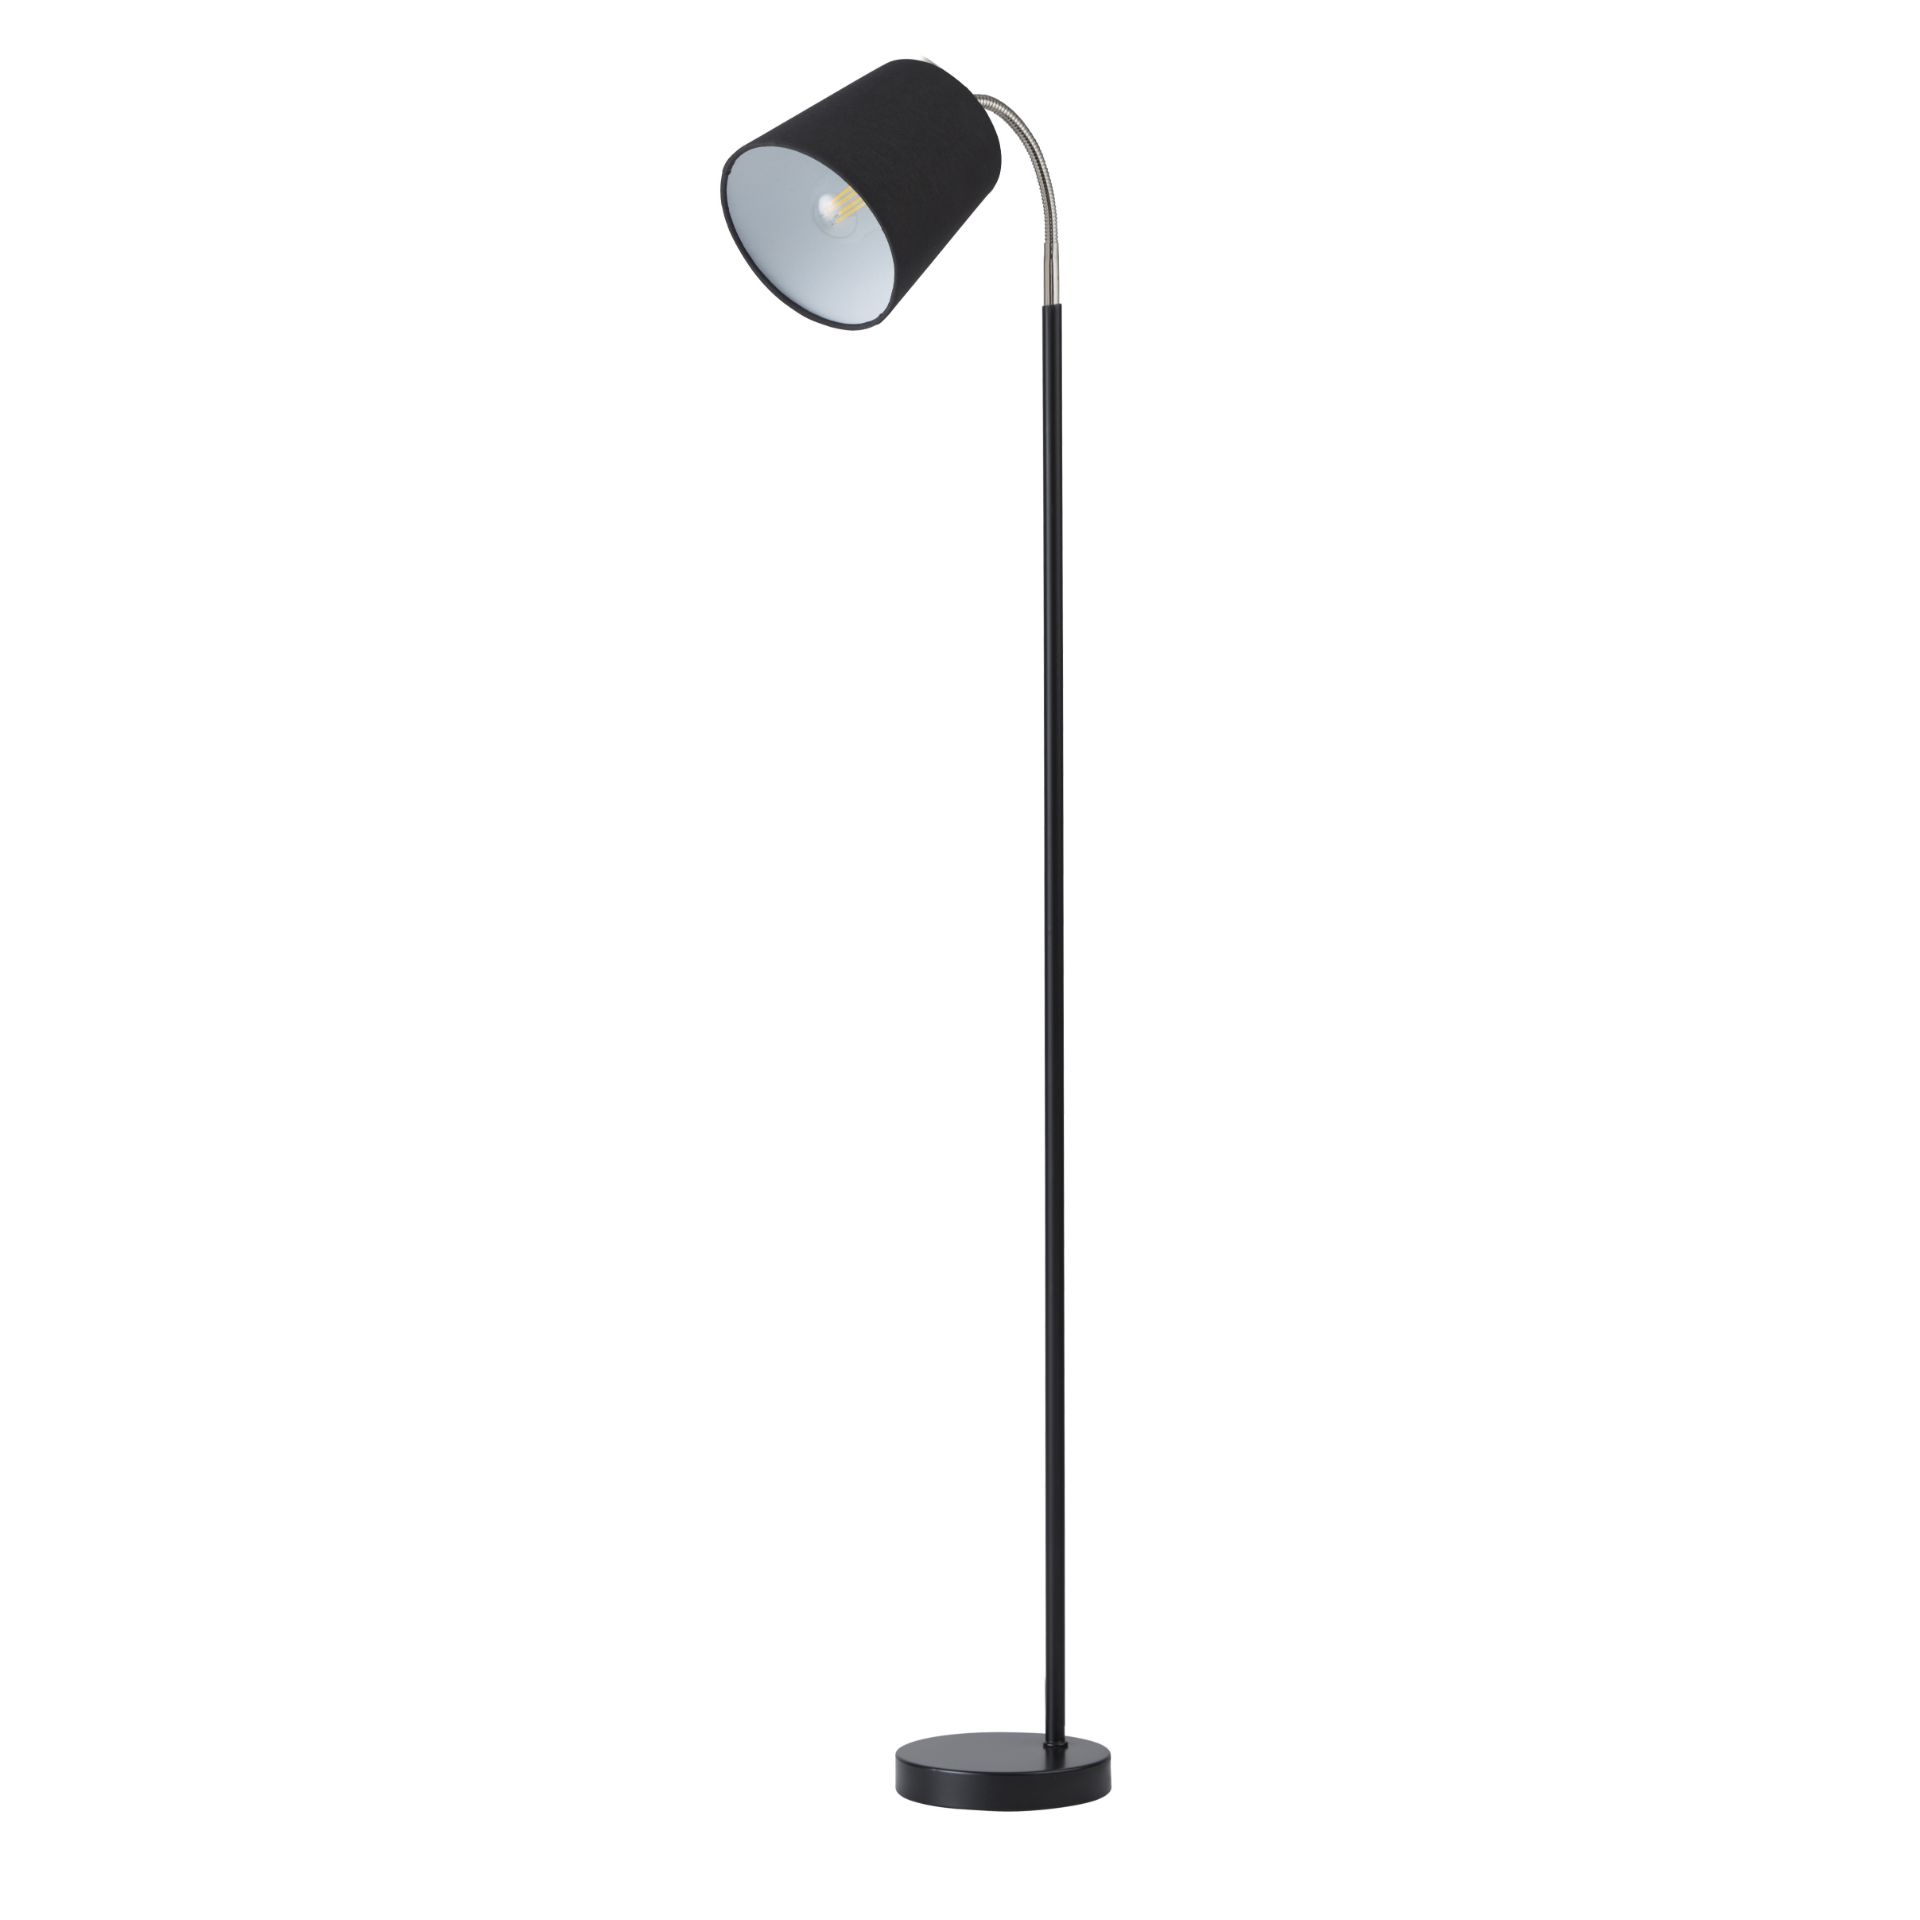 BRAND NEW BLACK METAL FLEXI HEAD FLOOR LAMP COMPLETE WITH FABRIC SHADE, 142CM HIGH. 40W.